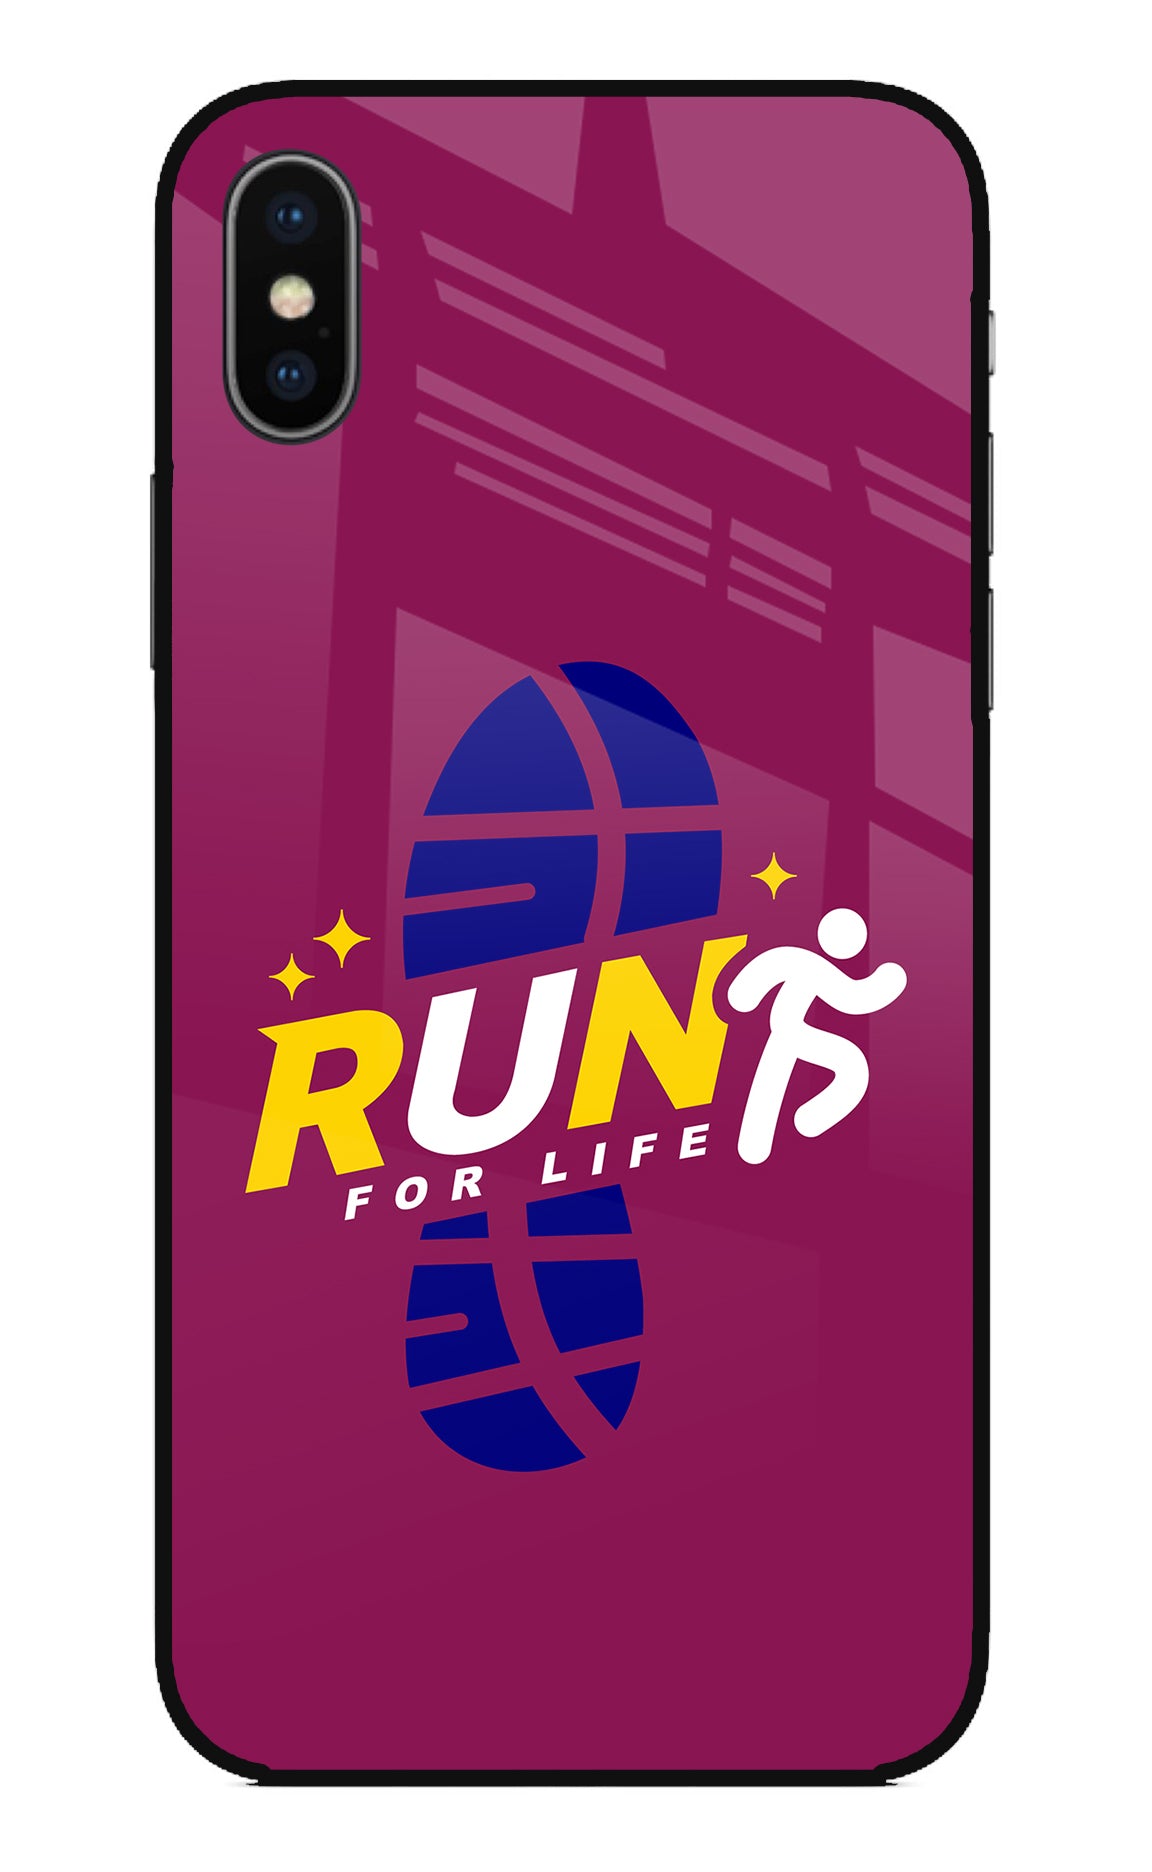 Run for Life iPhone X Back Cover